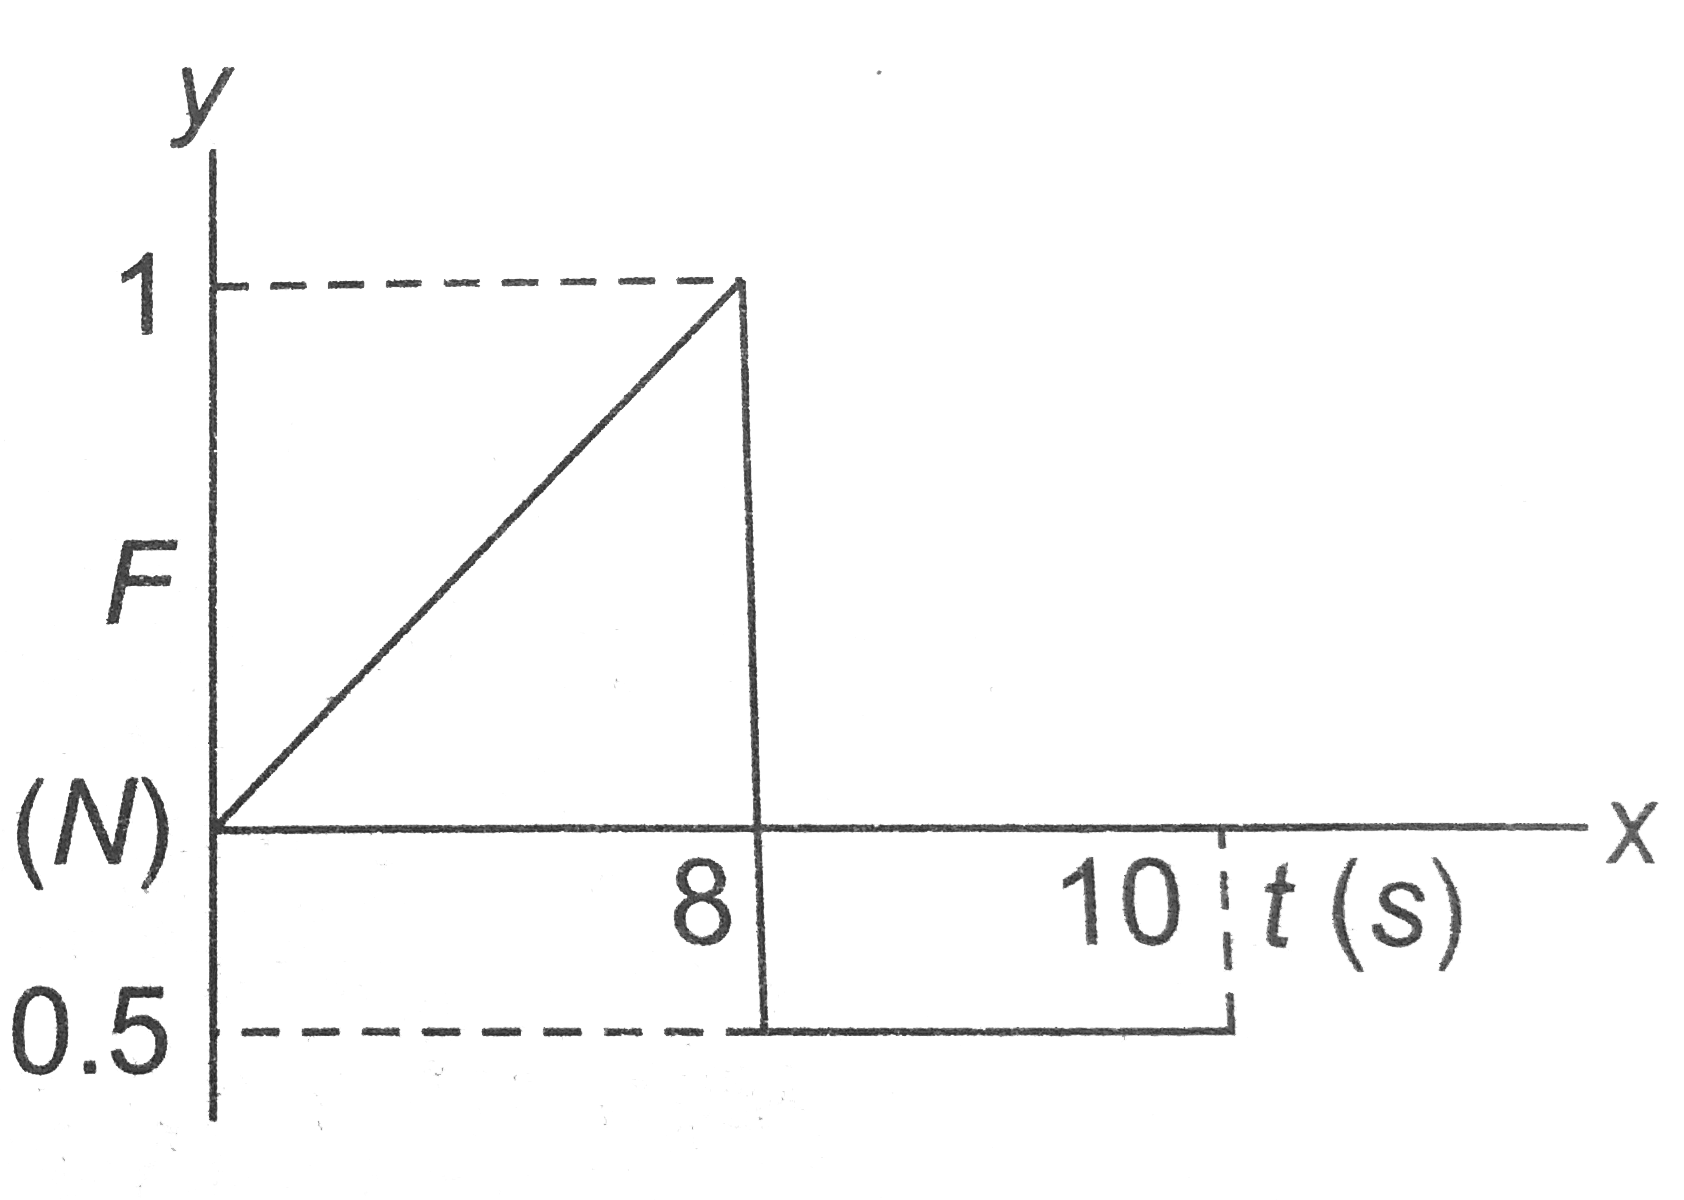 A force-time graph for the motion of a body is shown in the figure. The change in the momentum of the body between zero and 10sec is